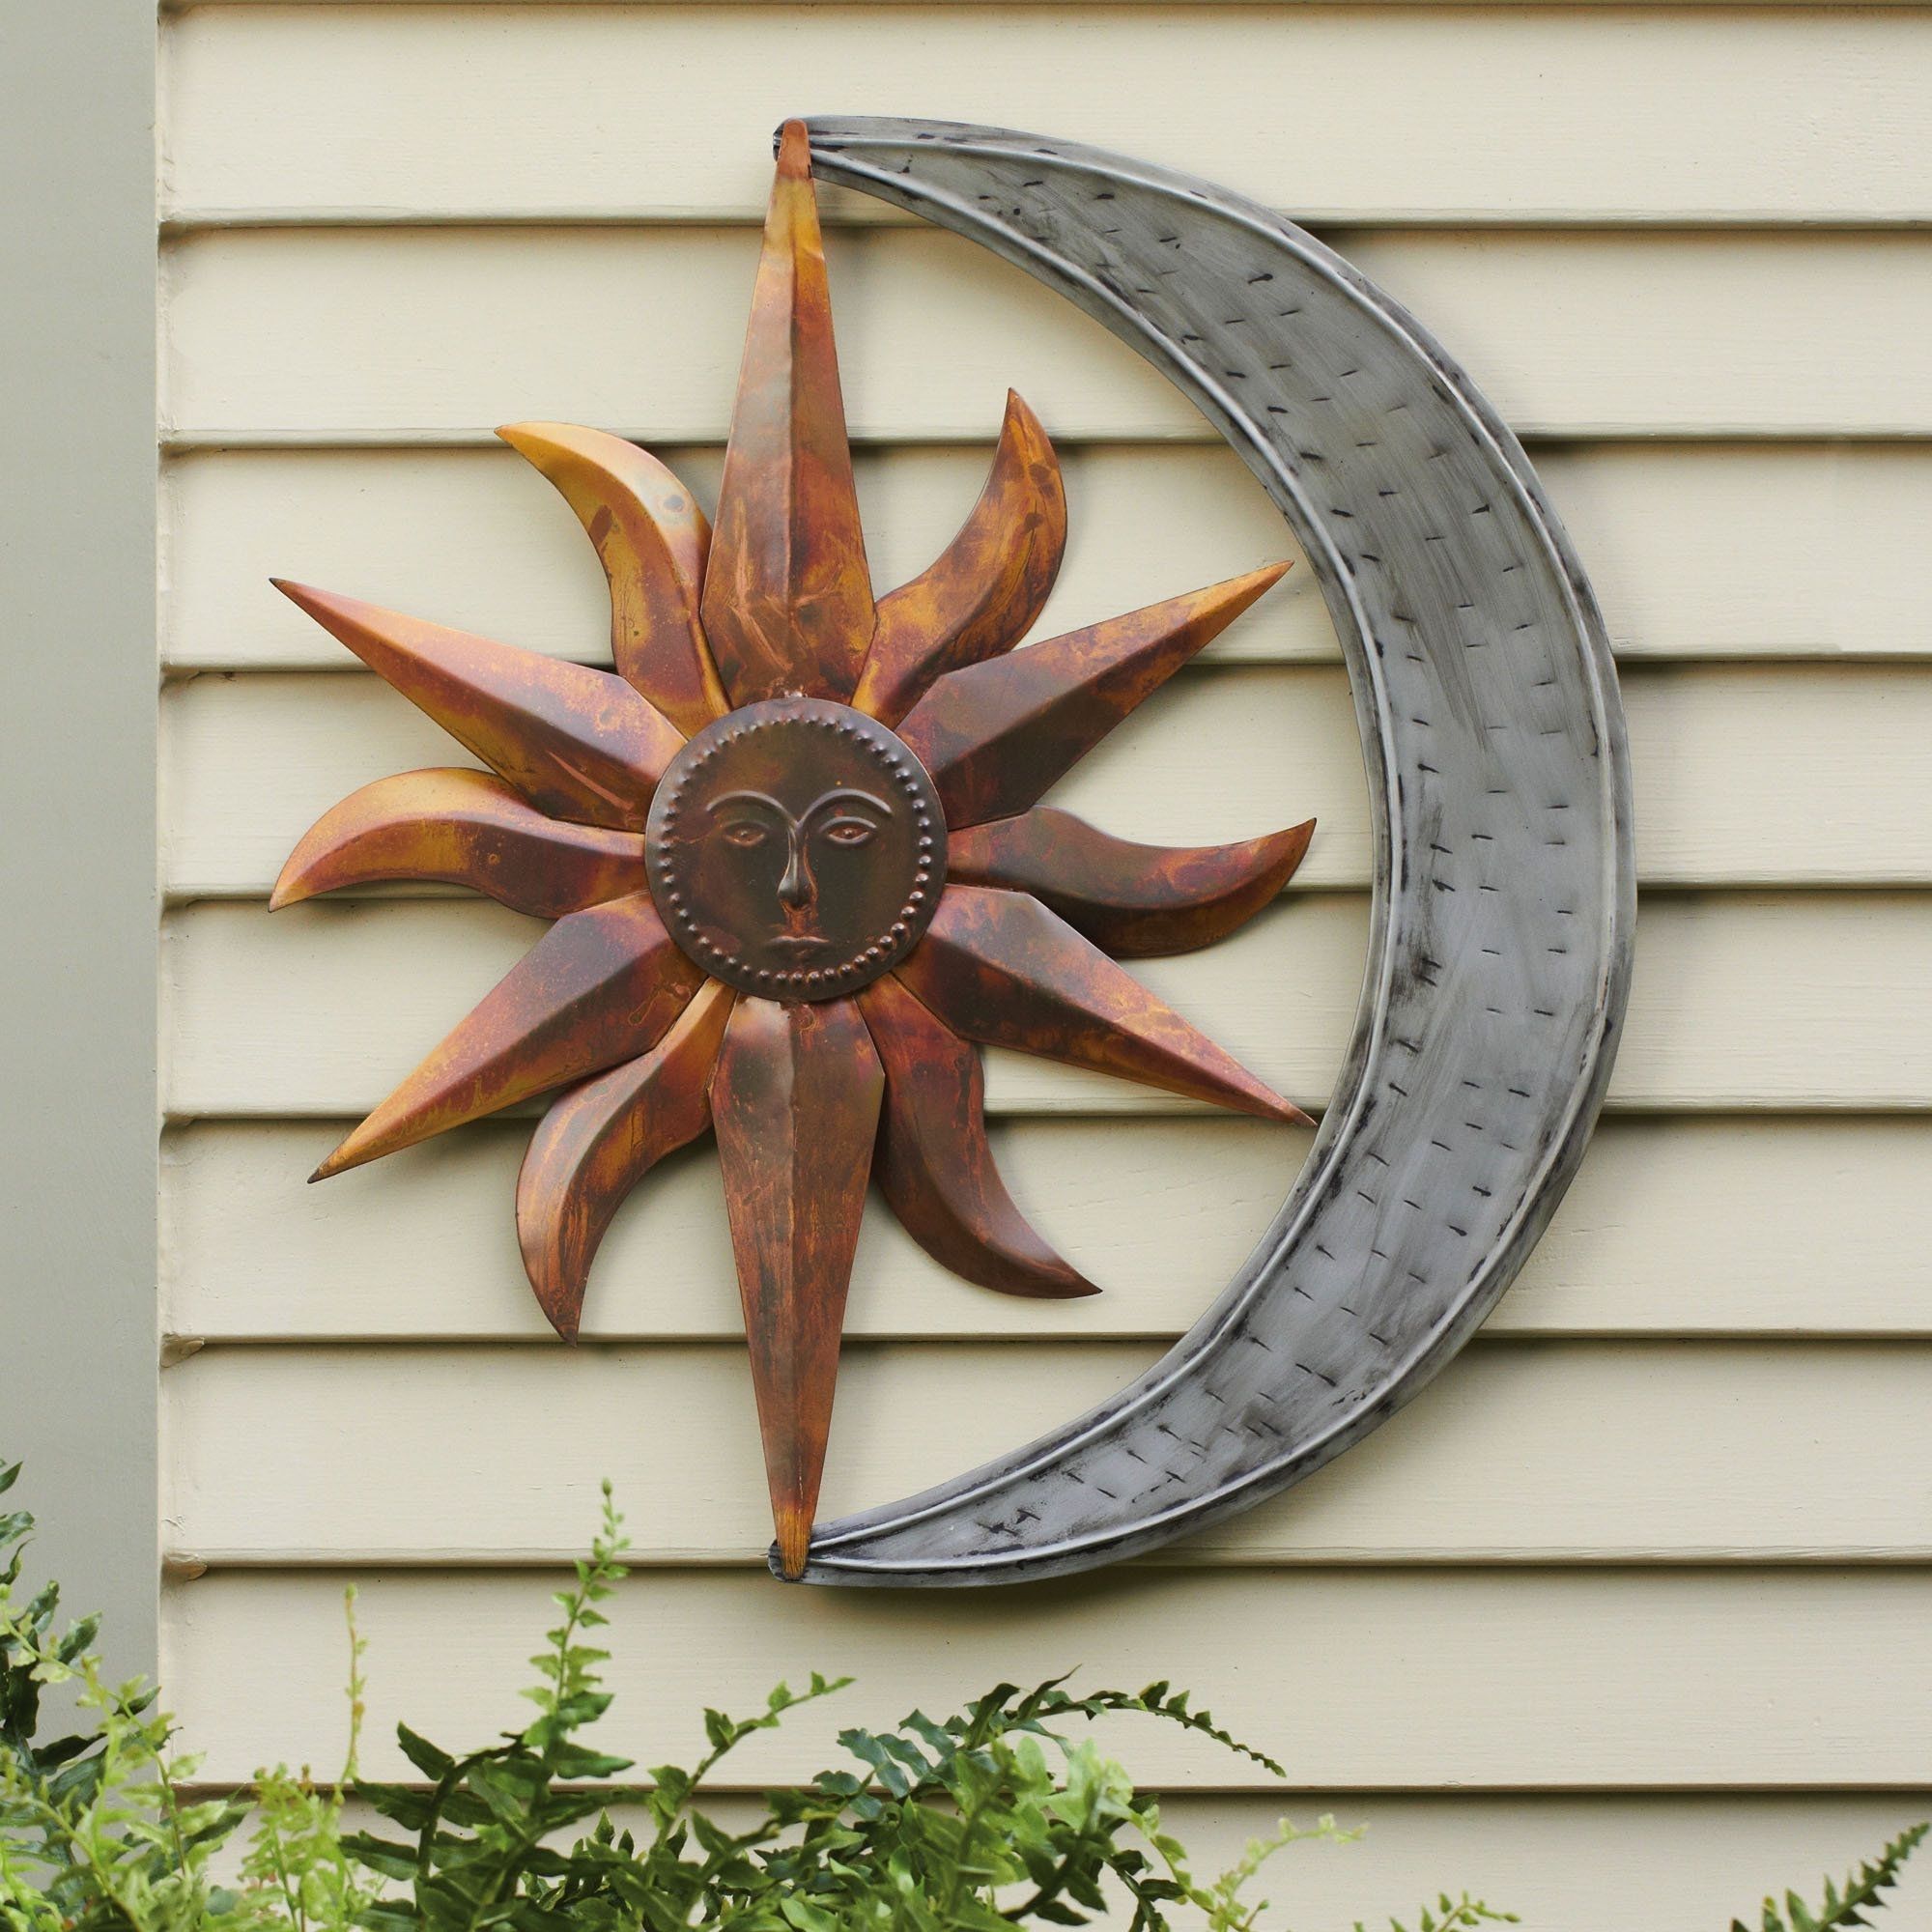 Large Outdoor Metal Sun Wall Art Decor How To Decorate A Brick Pertaining To Large Outdoor Wall Art (View 1 of 20)